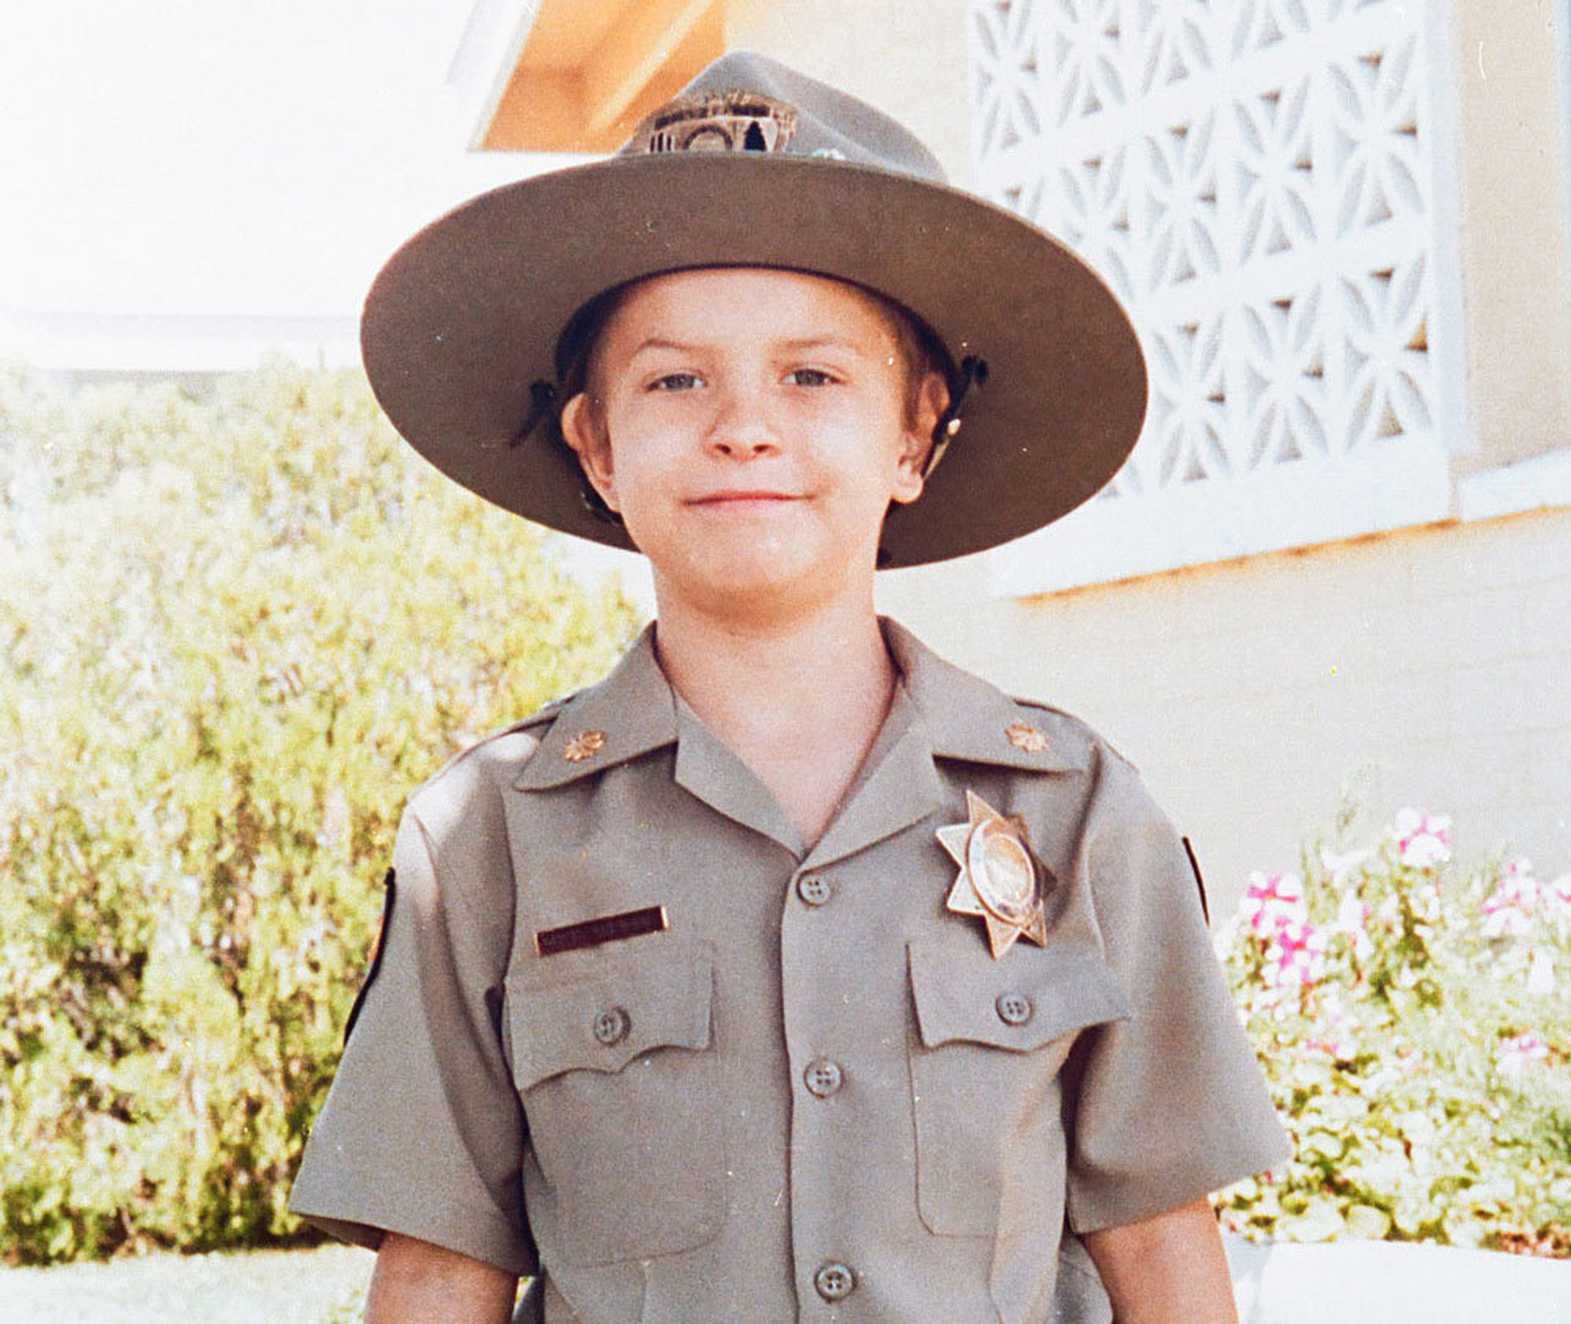 The very first Wish Child, Chris Greicius, wearing his Police uniform.